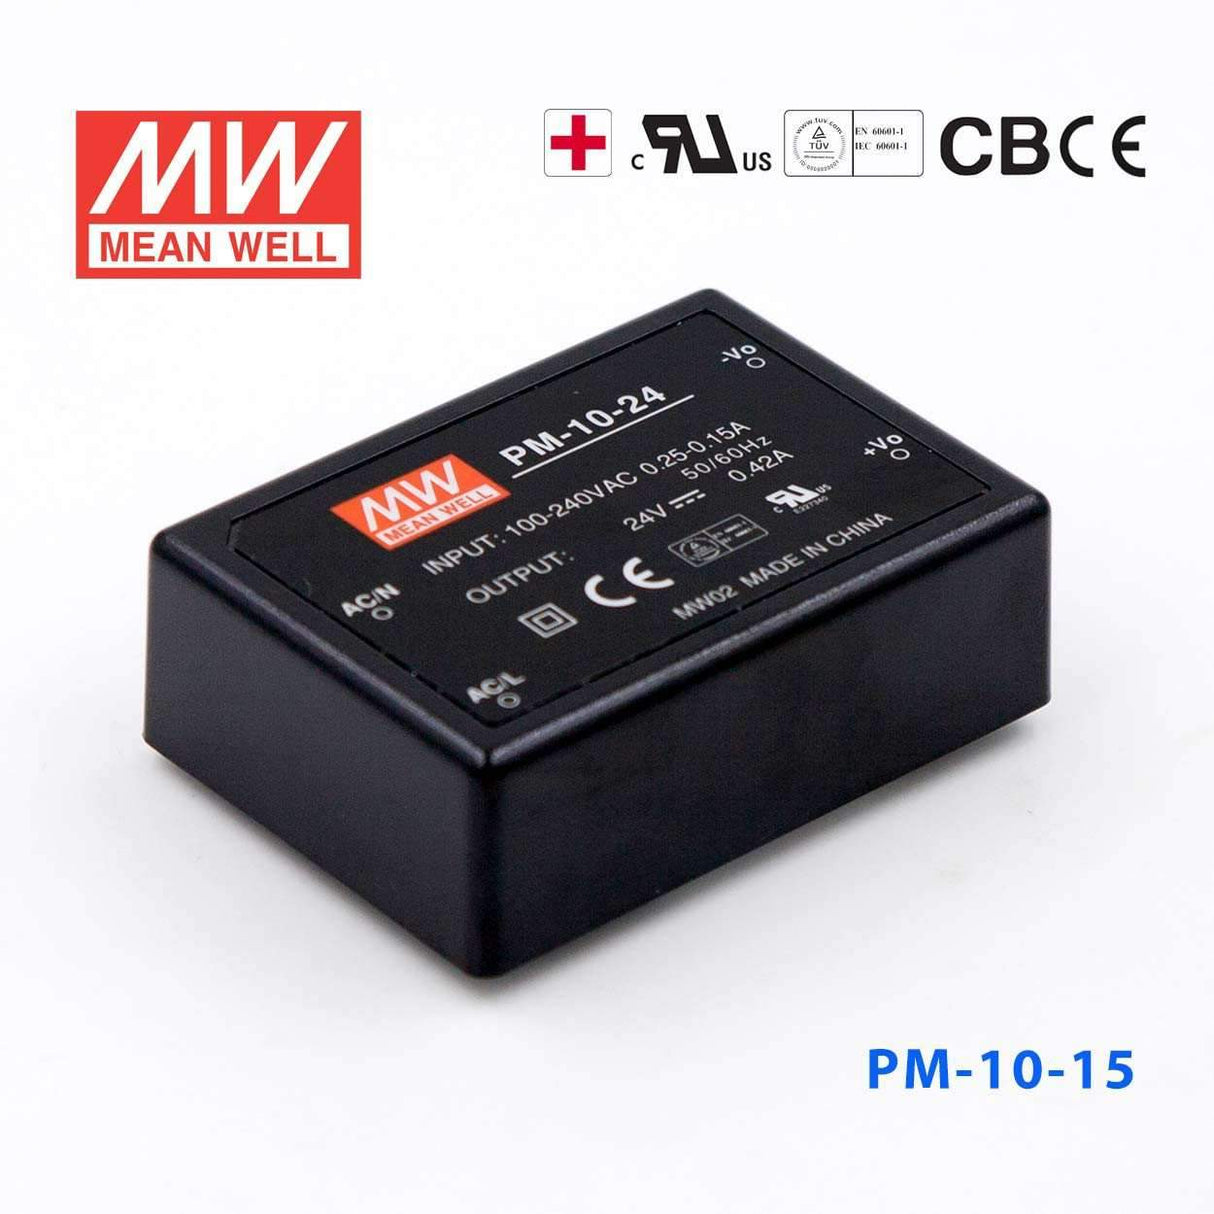 Mean Well PM-10-15 Power Supply 10W 15V